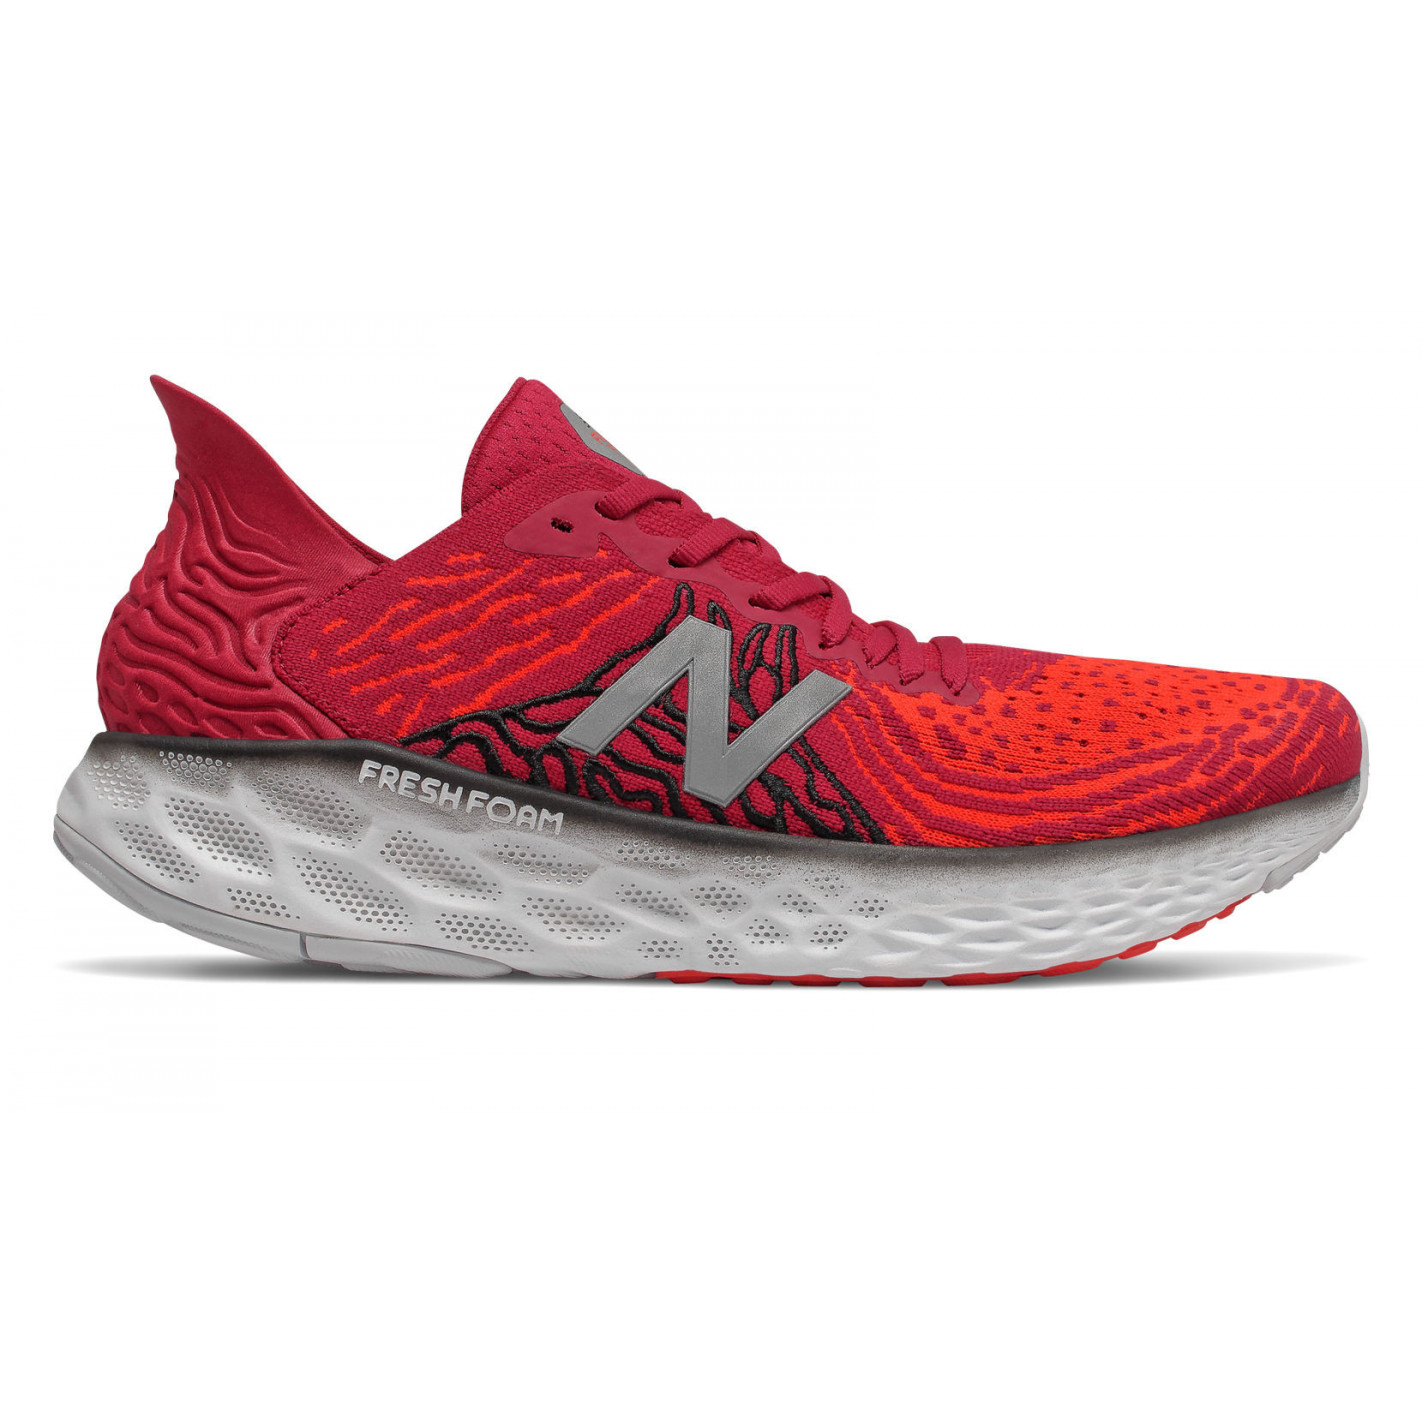 Chaussures Running NEW BALANCE Homme M1080 v10 Rouge / Gris PE ...